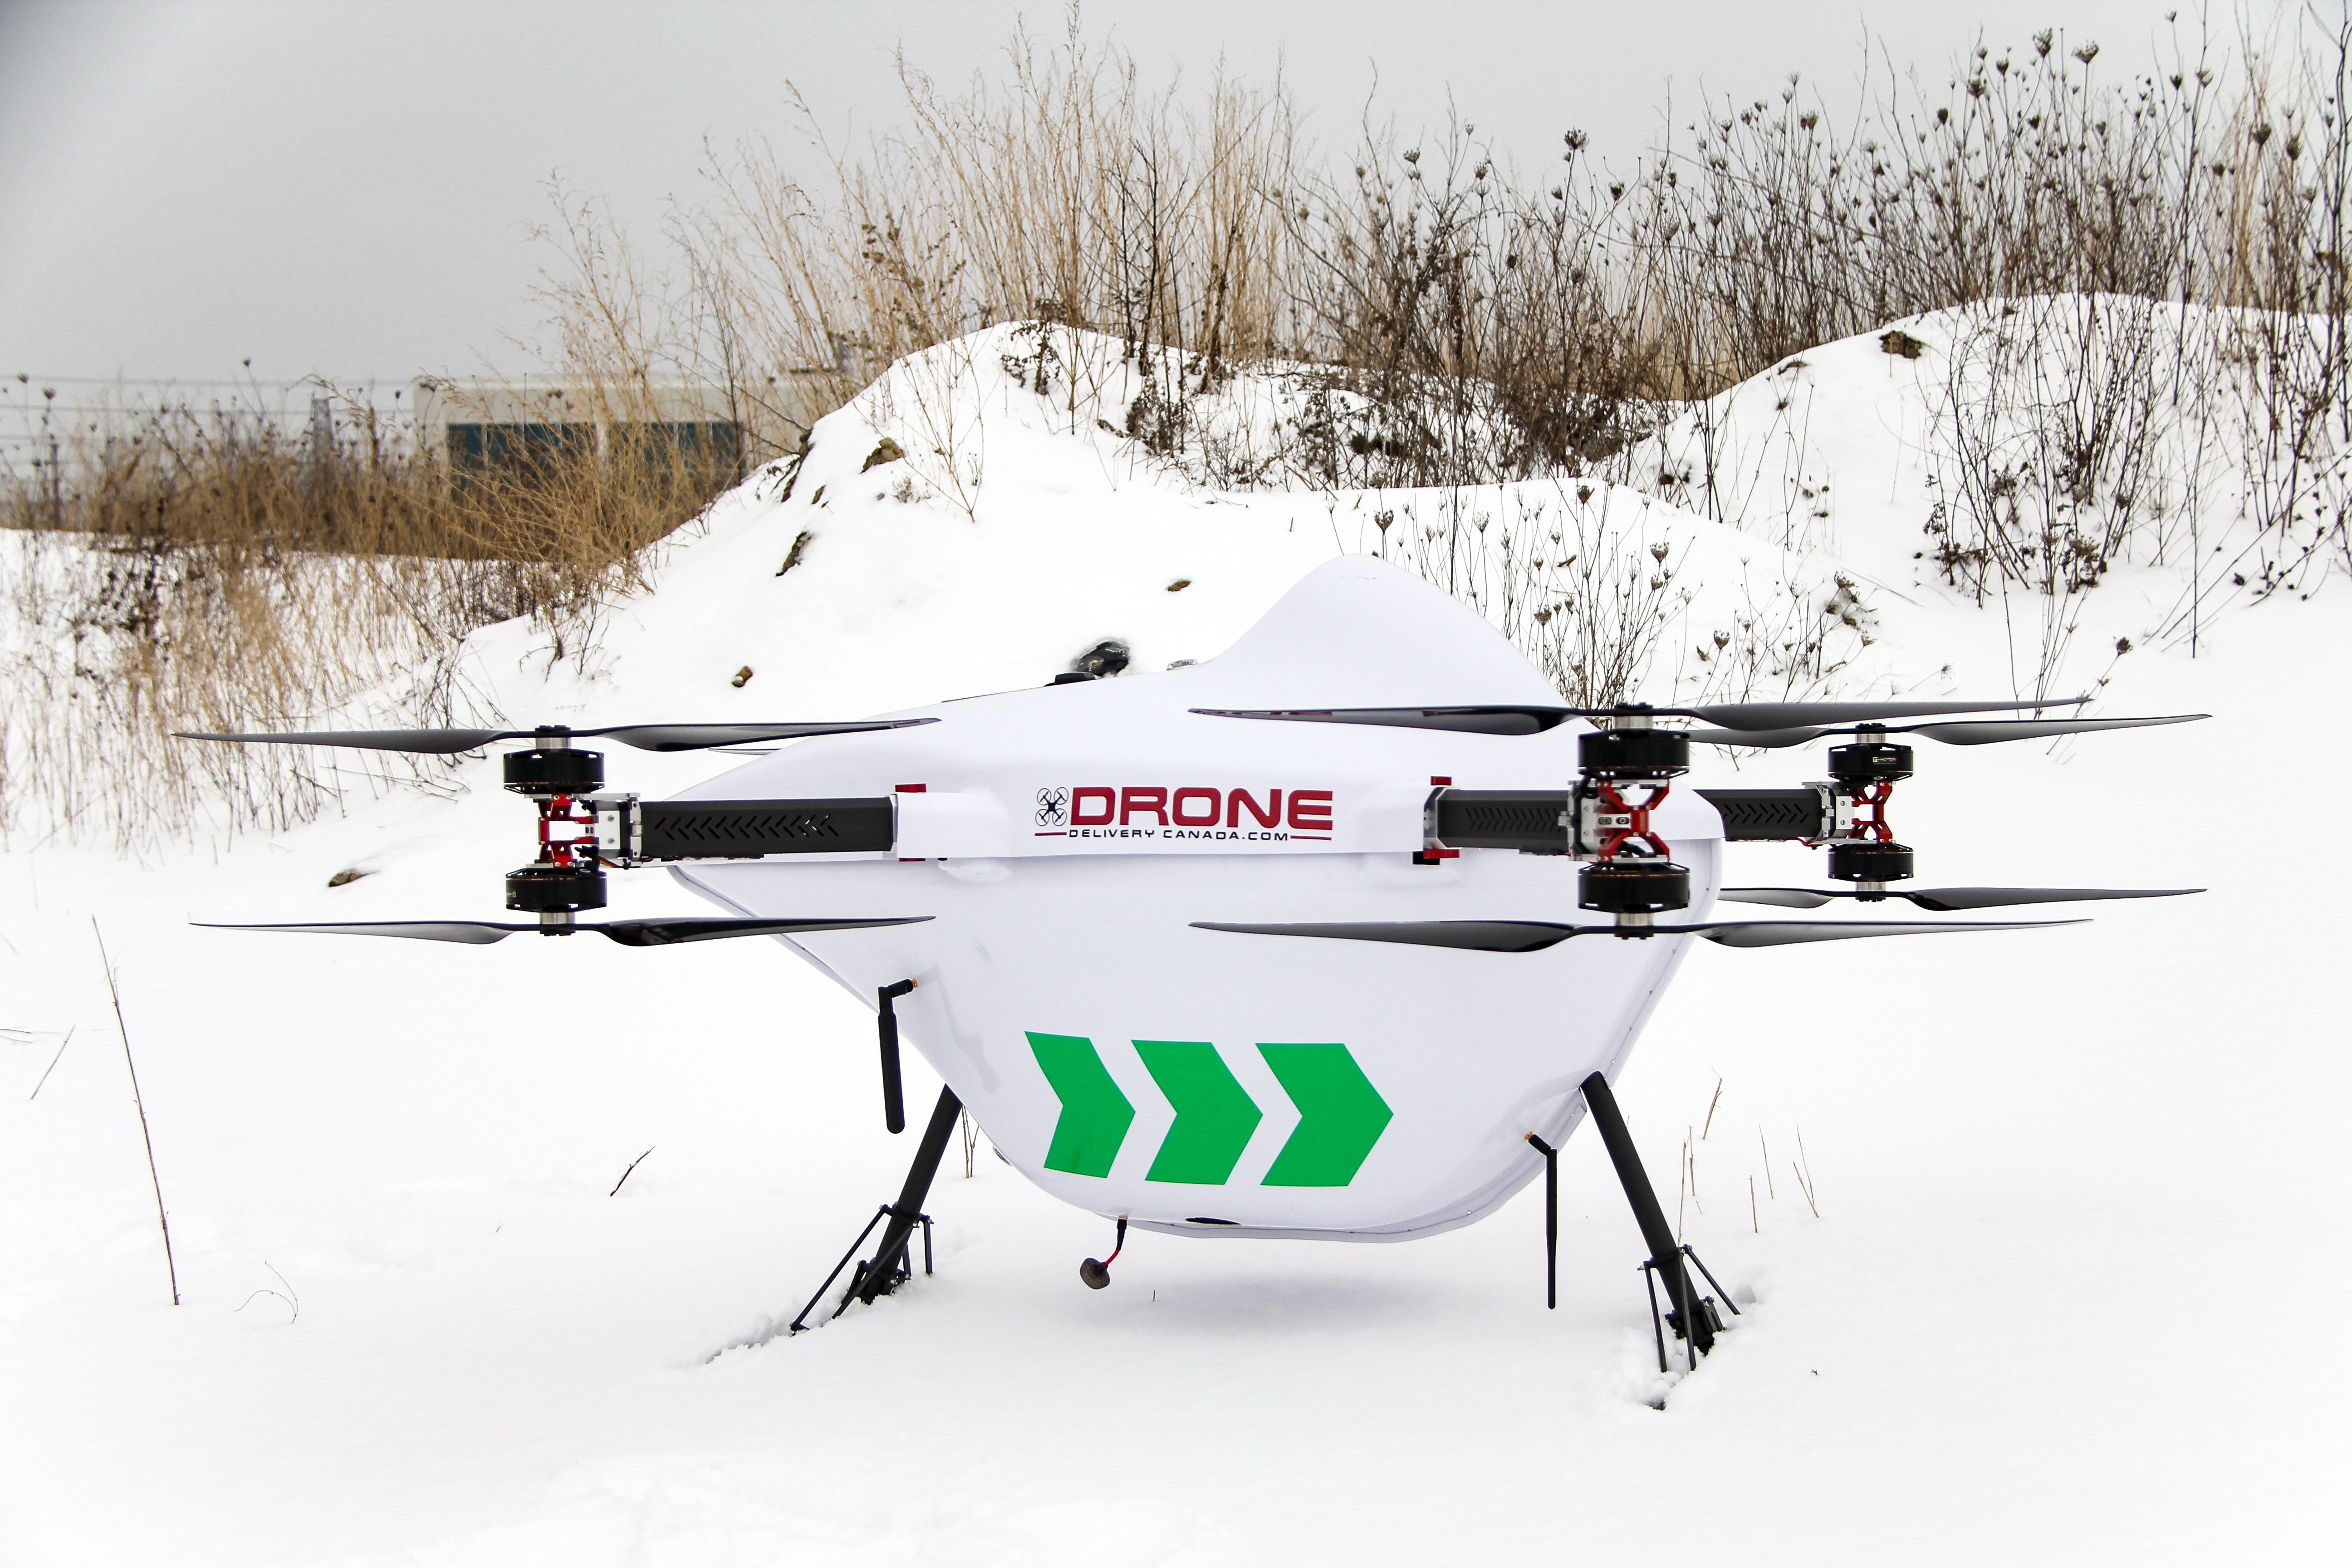 Drone Deliveries during Coronavirus (COVID-19) pandemic